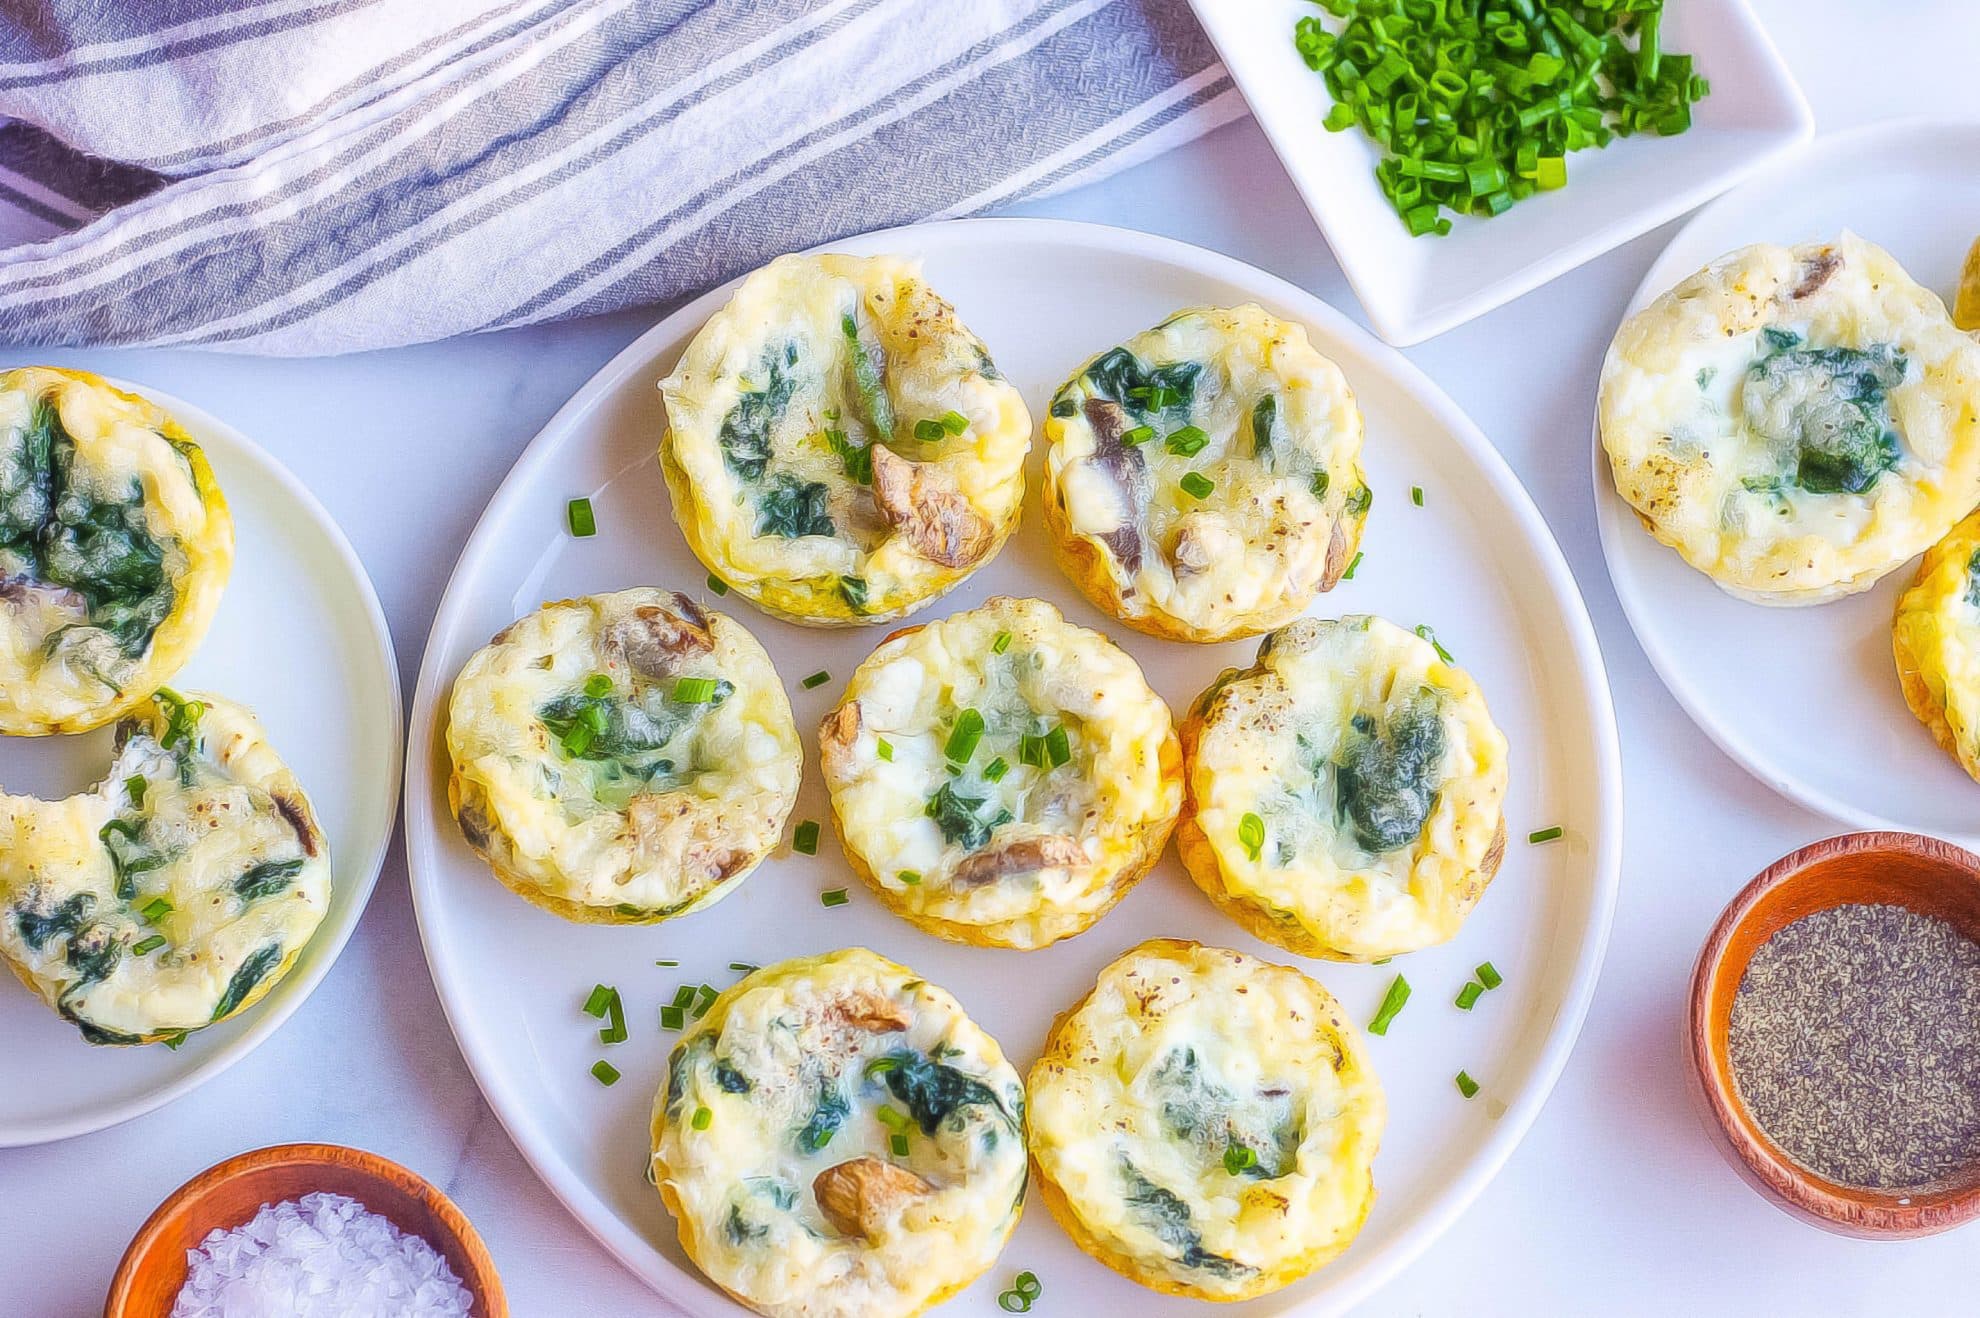 https://www.savoryexperiments.com/wp-content/uploads/2014/09/Spinach-Egg-Muffins-High-Res-8.jpg